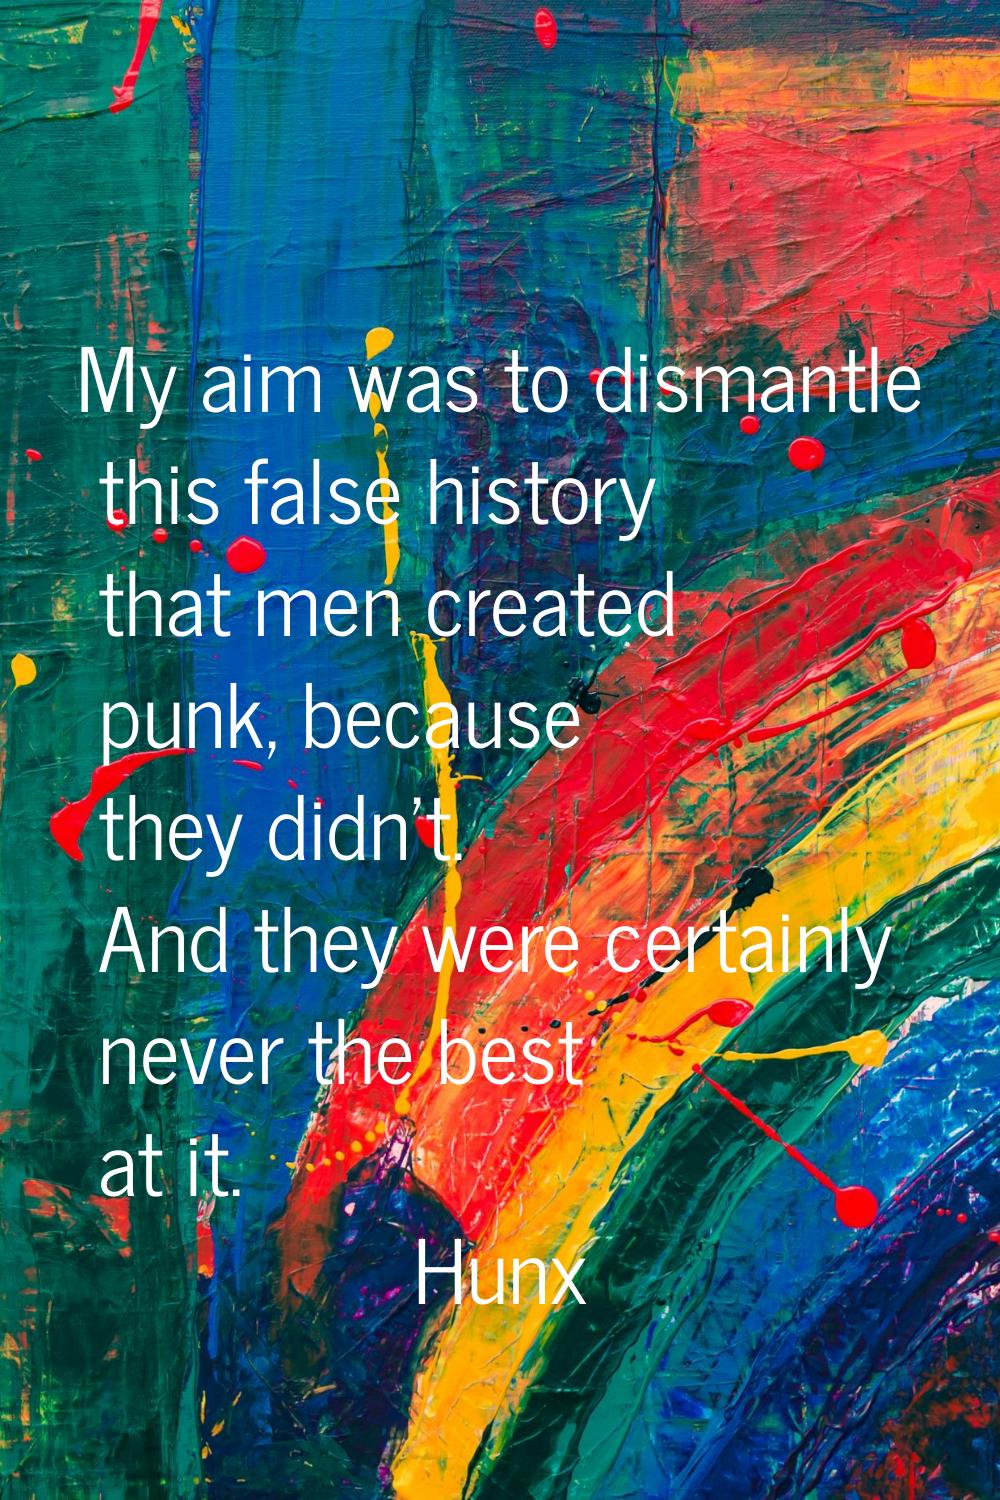 My aim was to dismantle this false history that men created punk, because they didn't. And they wer